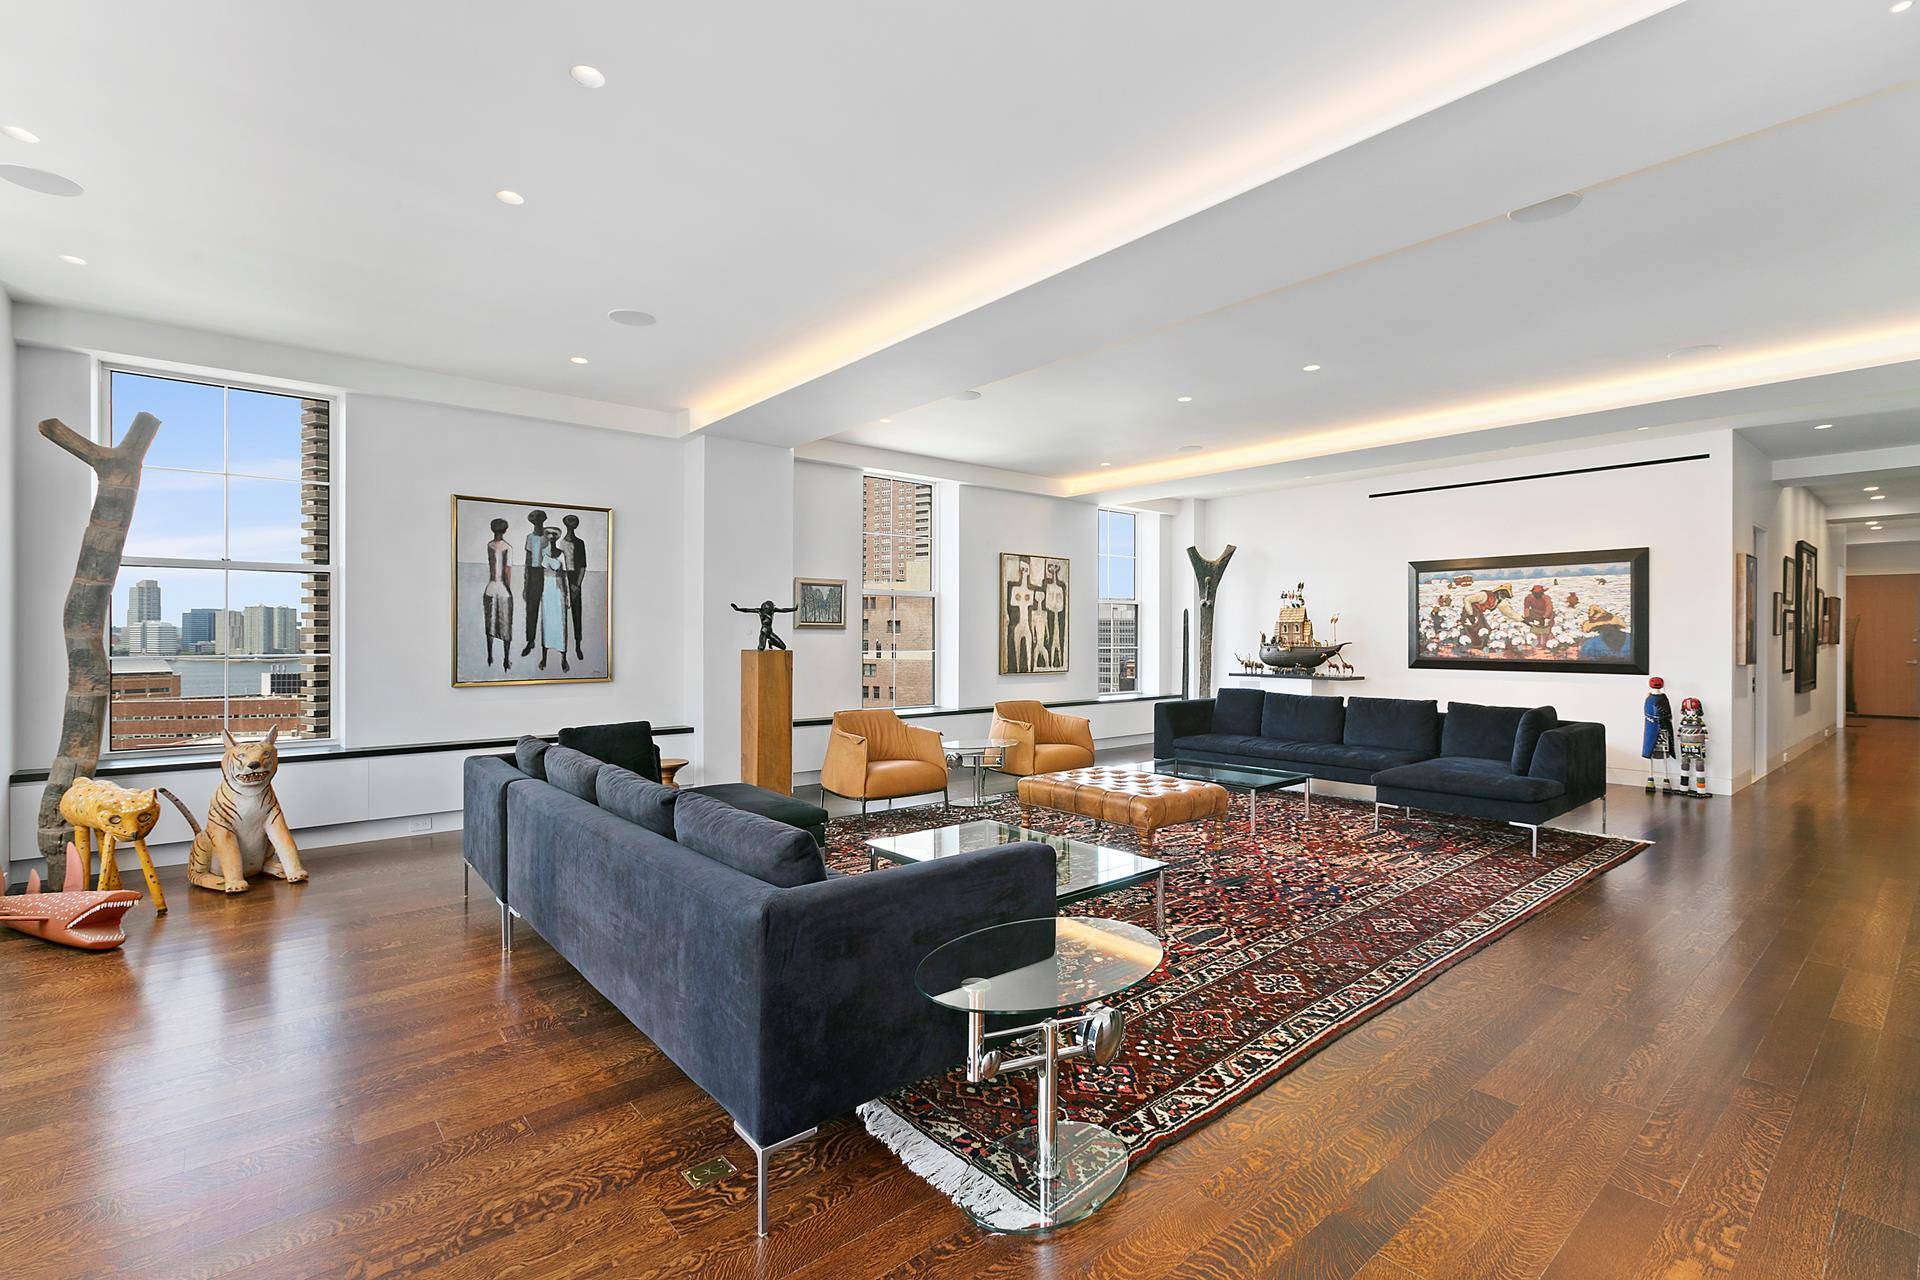 Straight from the pages of Elle Decor is this five bedroom, four and a half bath penthouse condominium with enormous private roof deck, open views, stunning light and a twenty ...